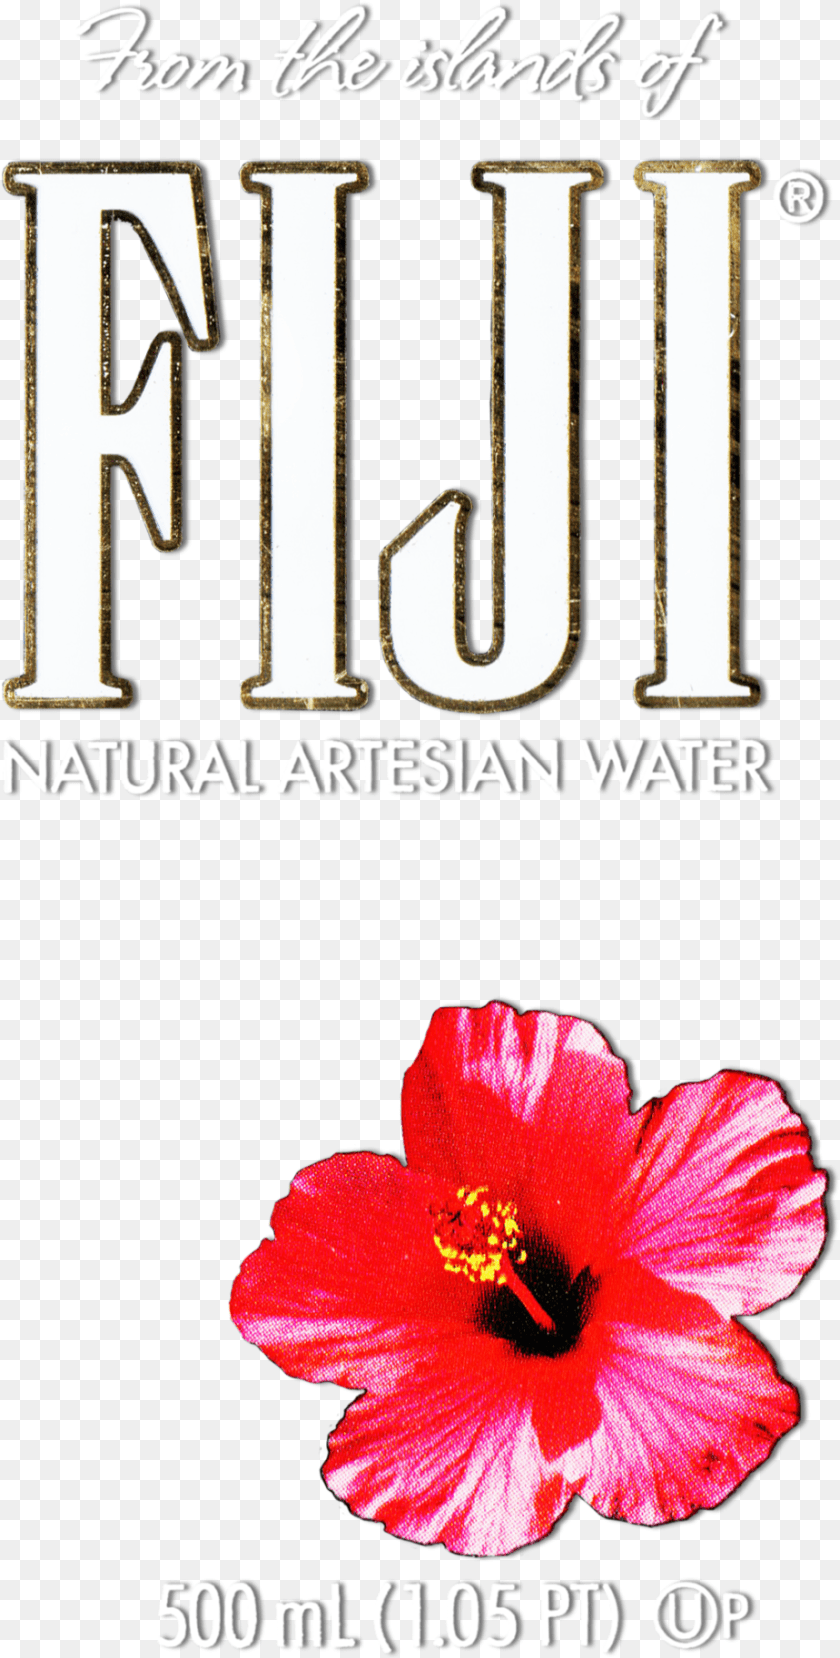 925x1826 Hibiscus Flower Image Collections Fiji Water Bottle Flower, Plant, Book, Publication, Rose Transparent PNG